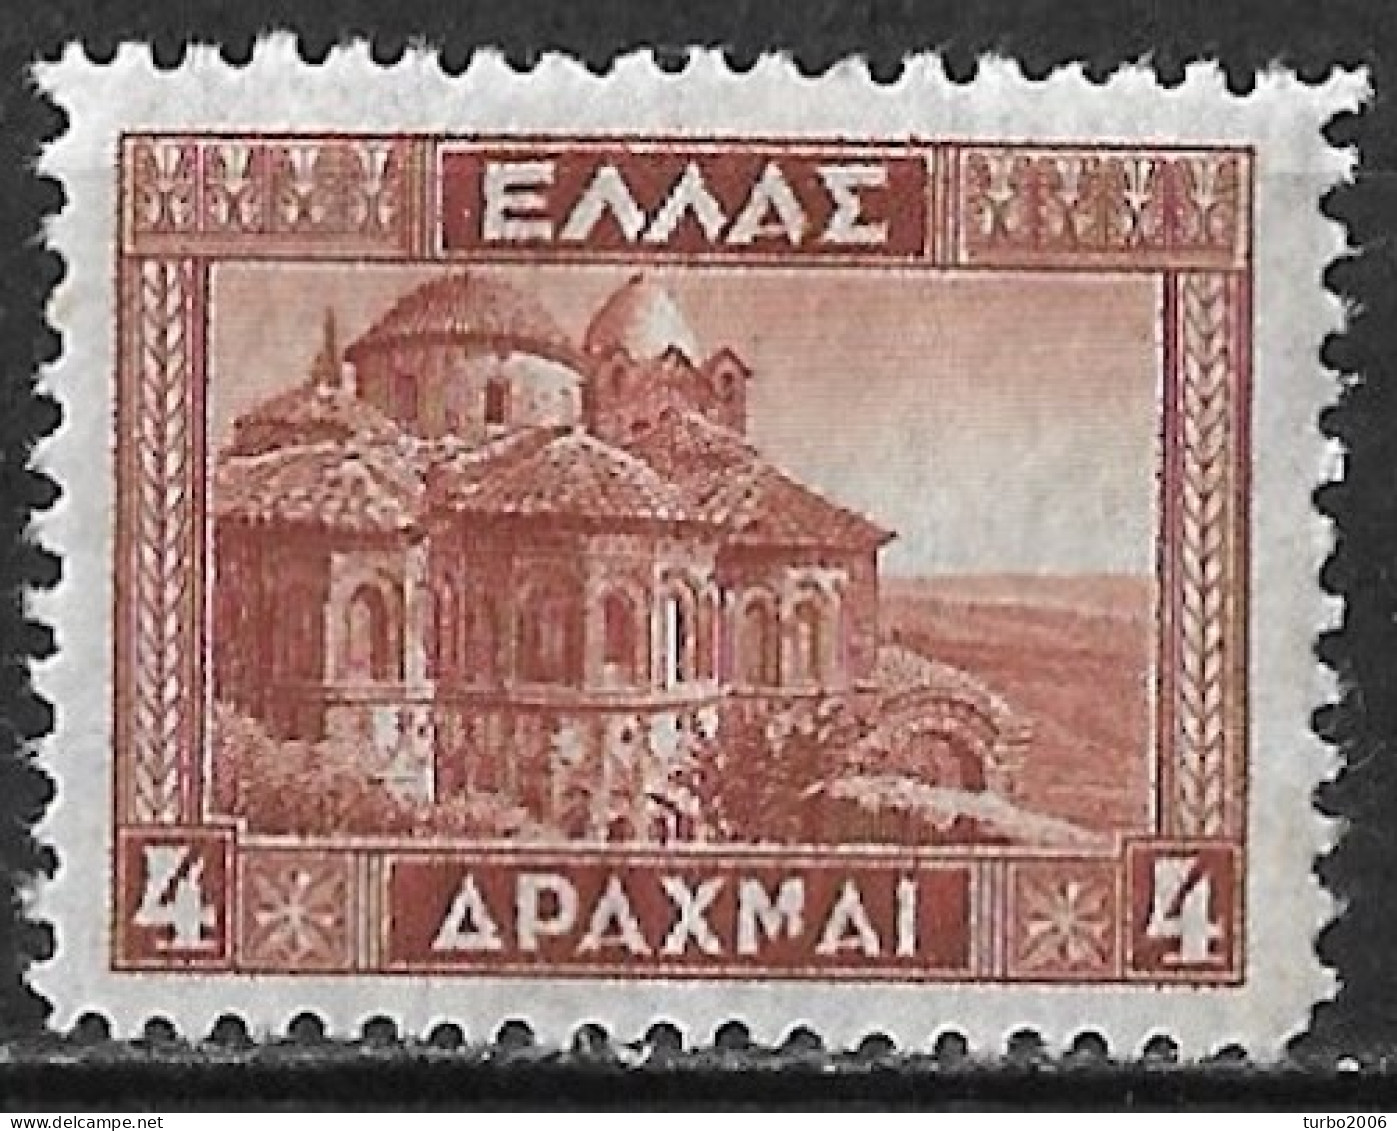 GREECE 1935 Mystras Cathedral 4 Dr Brown Vl. 480 MNH - Neufs